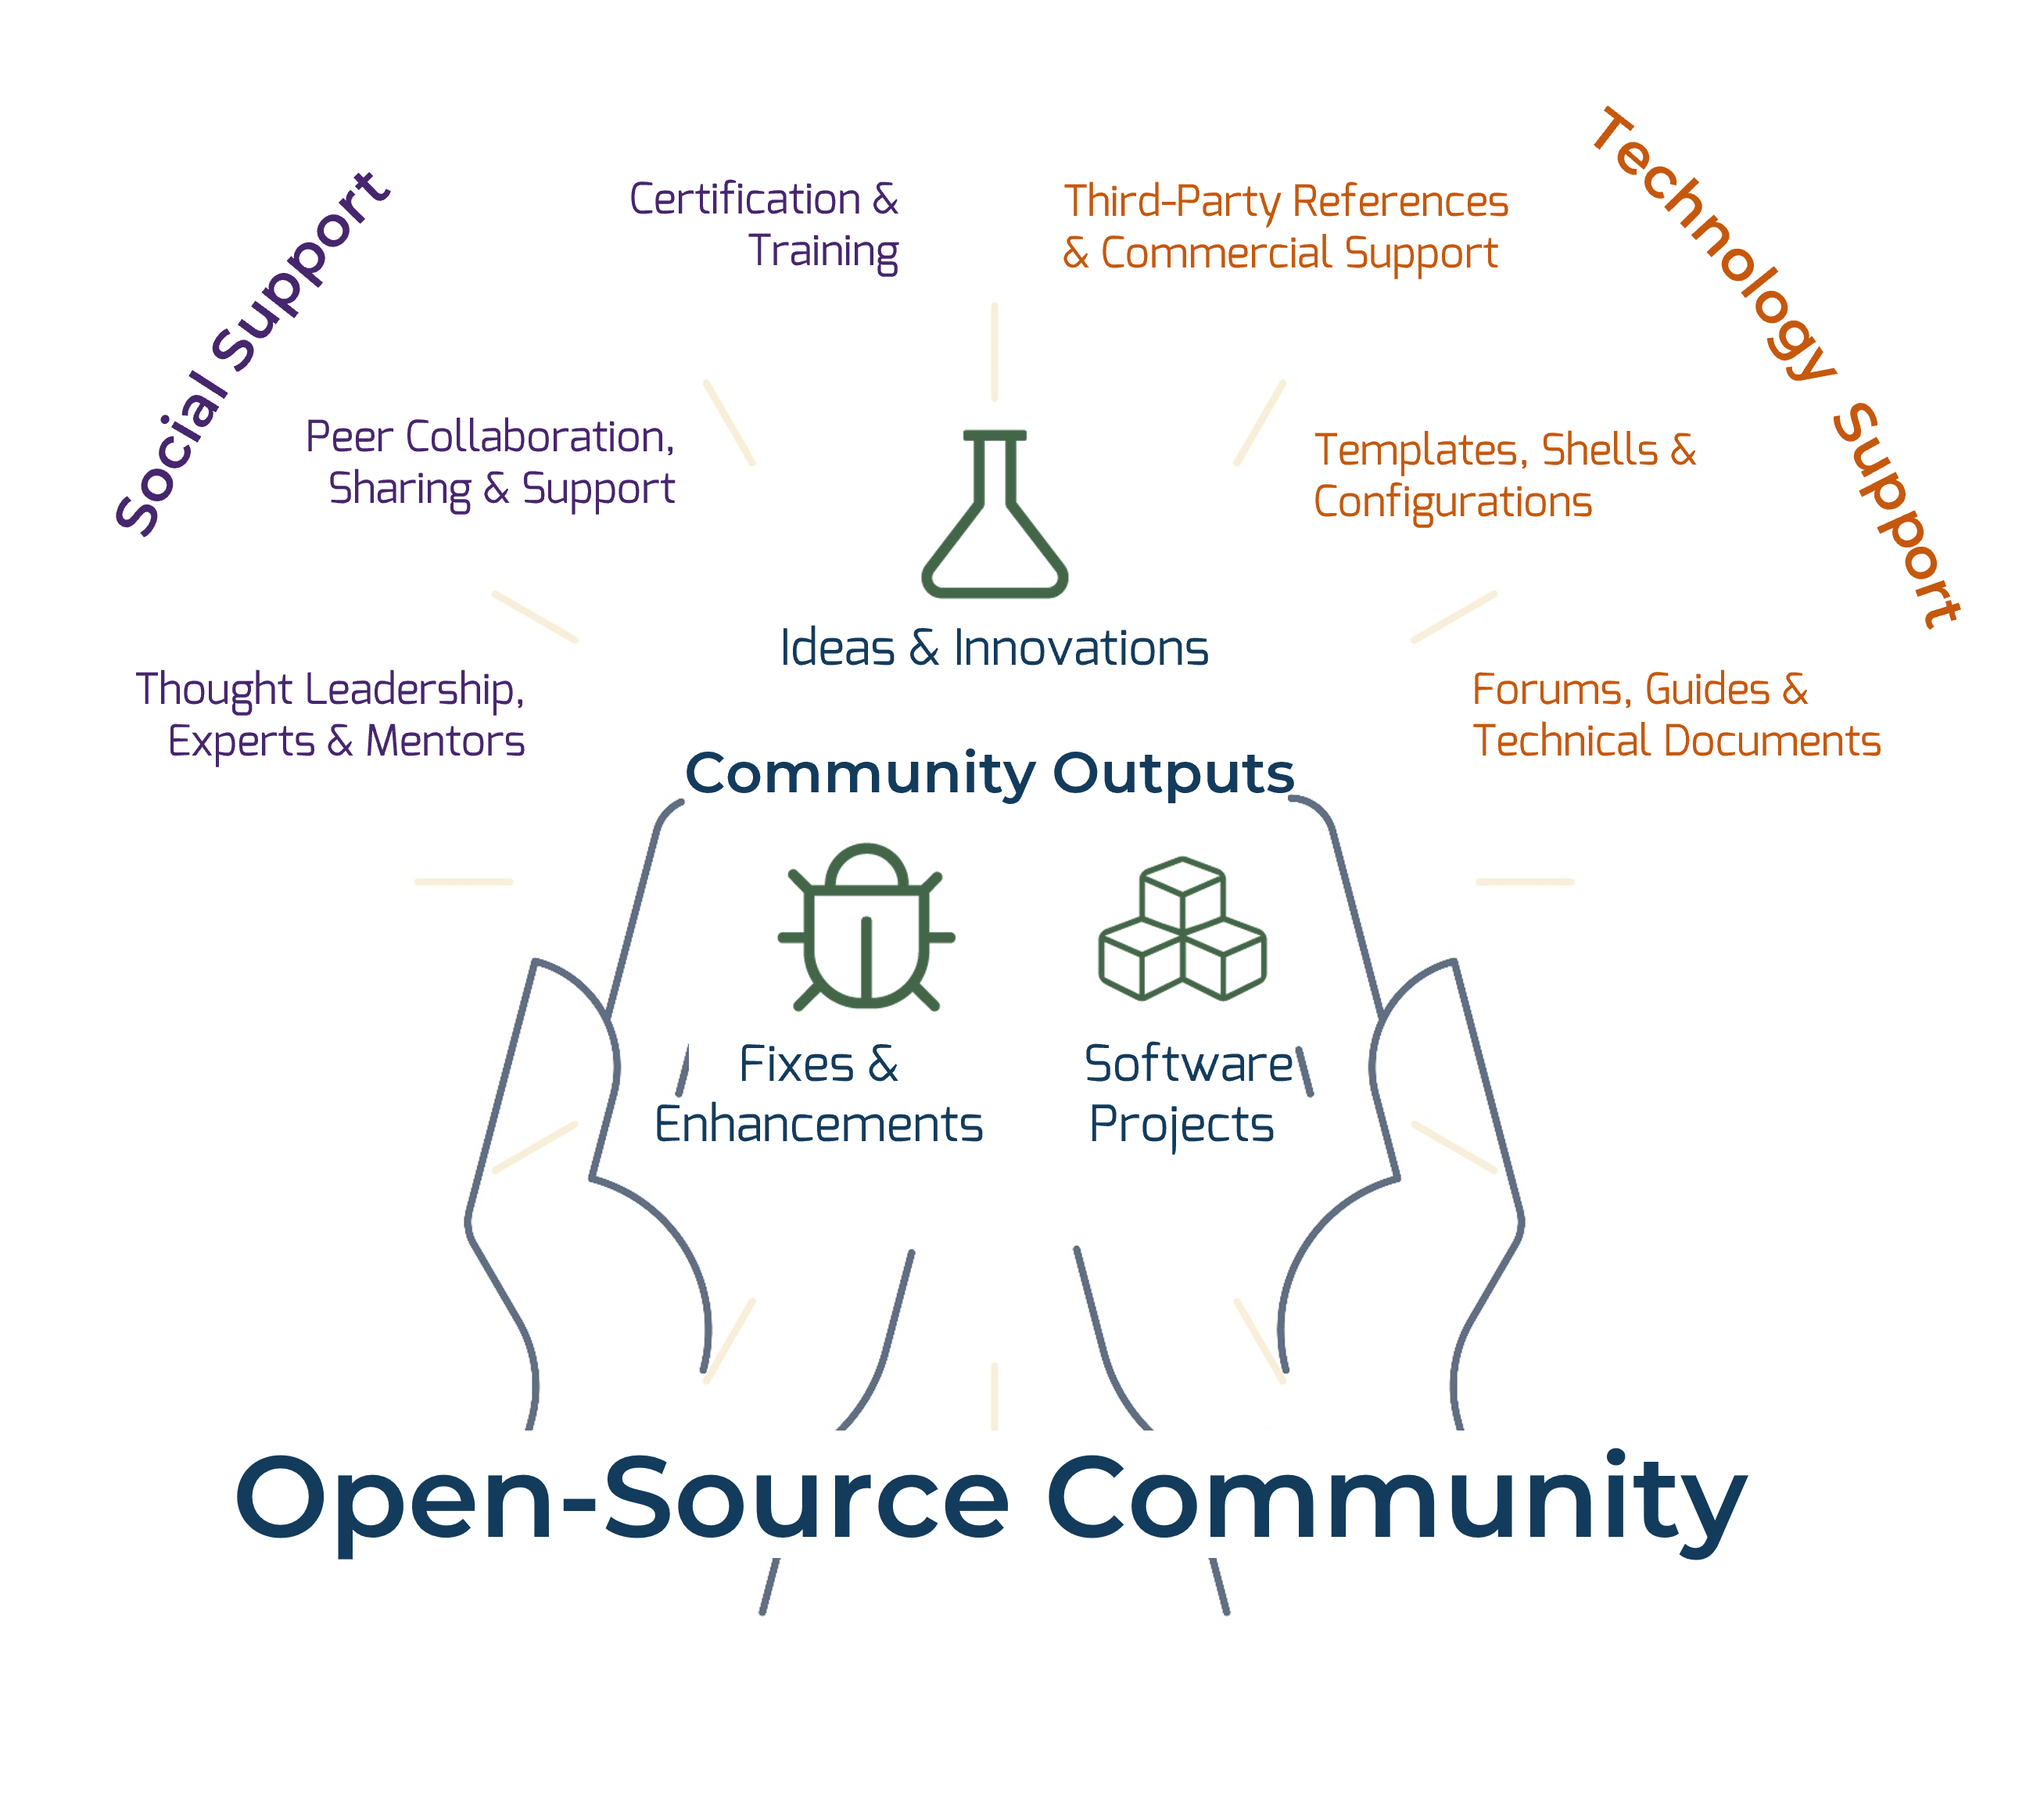 A diagram of open-source community.